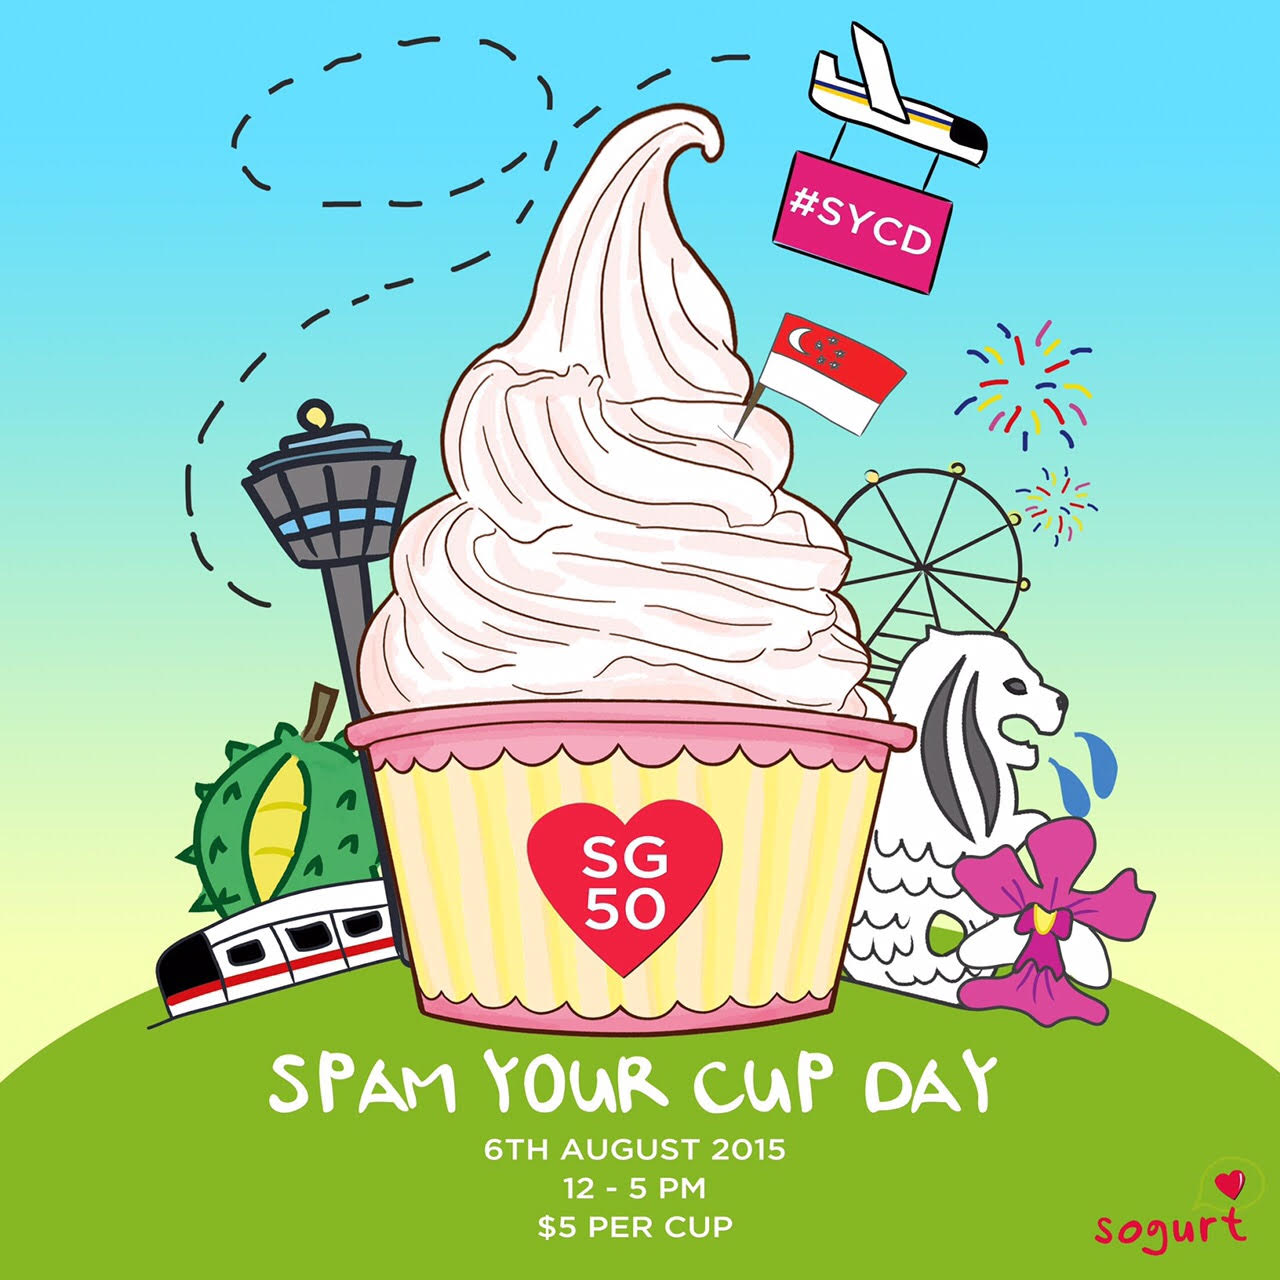 SPAM YOUR CUP DAY 2015